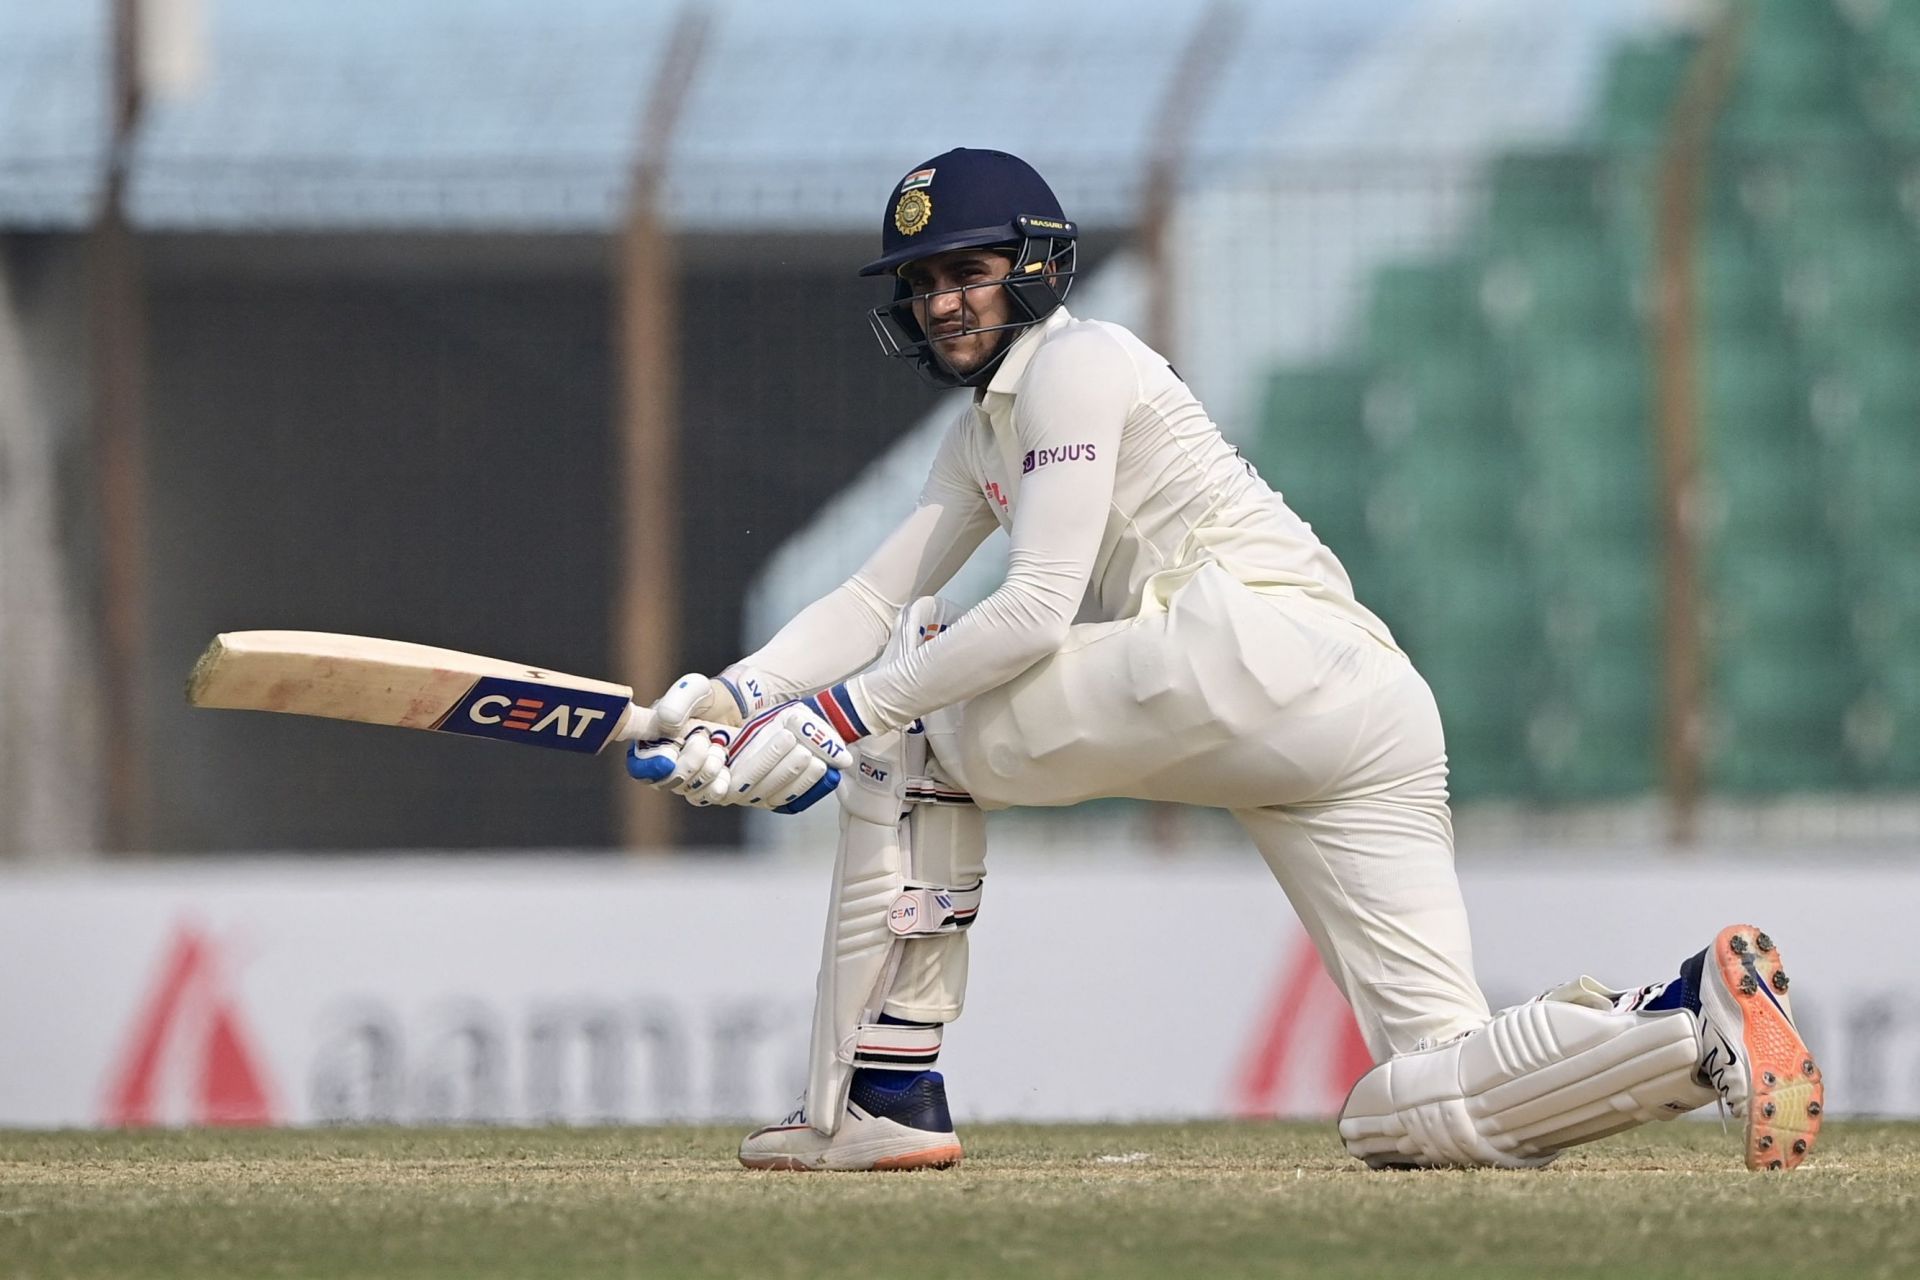 Shubman Gill scored his first Test hundred. (Credits: Twitter)